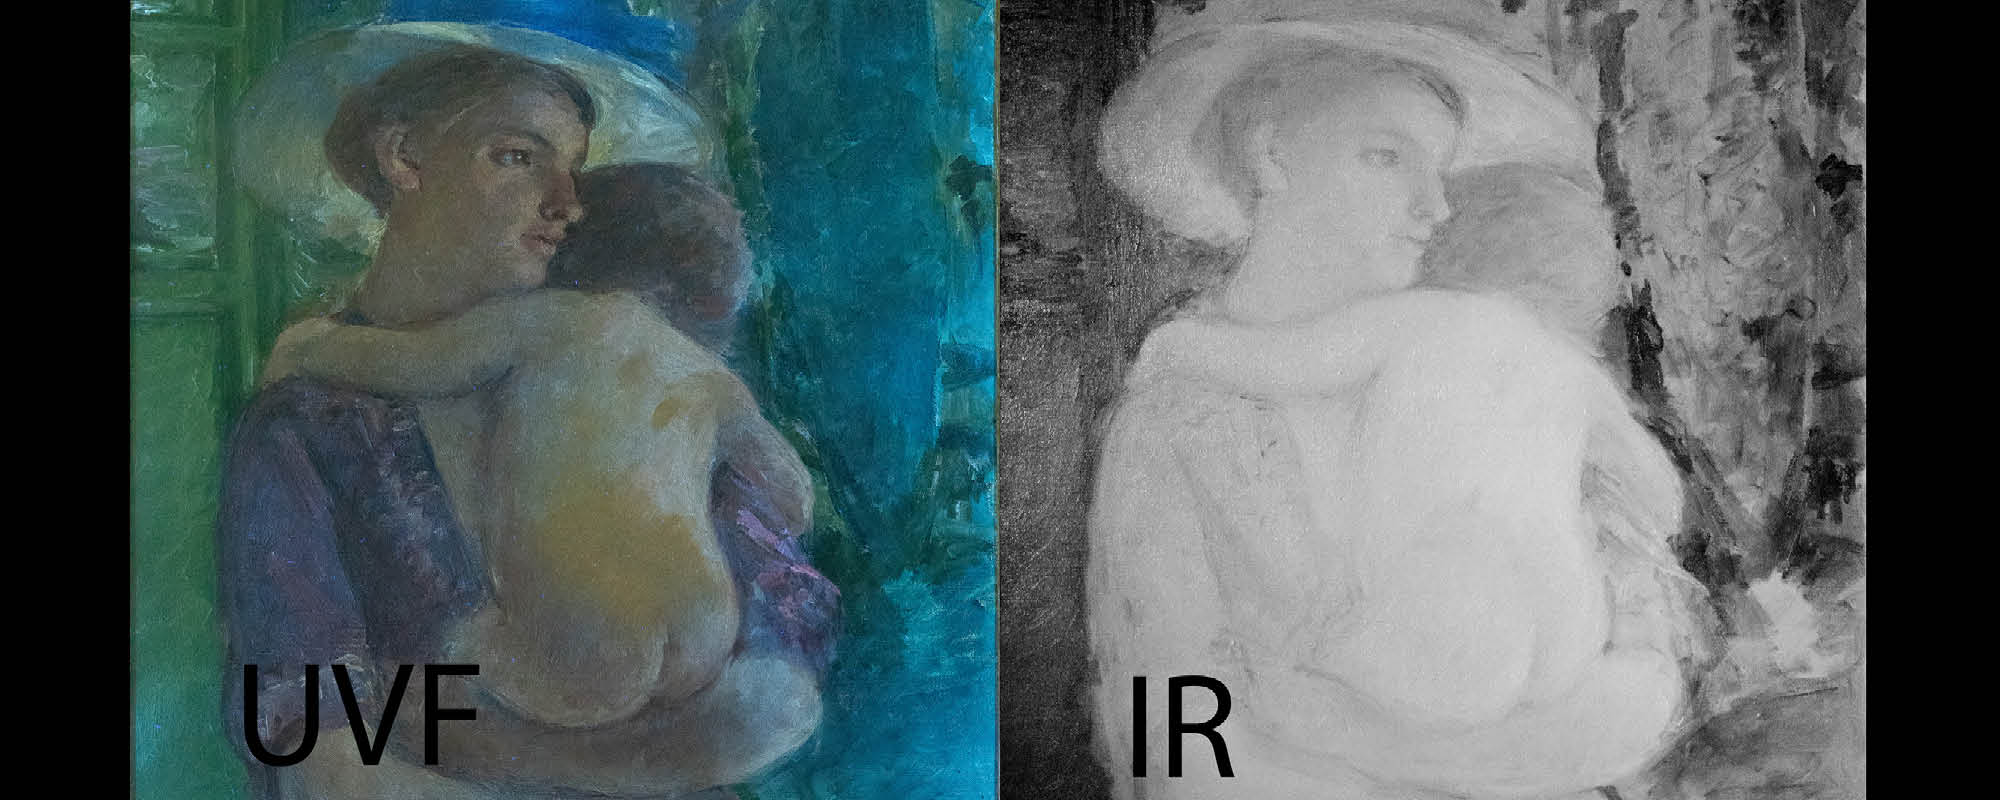 Spectral images of a Mary Cassatt painting of a woman holding a baby.